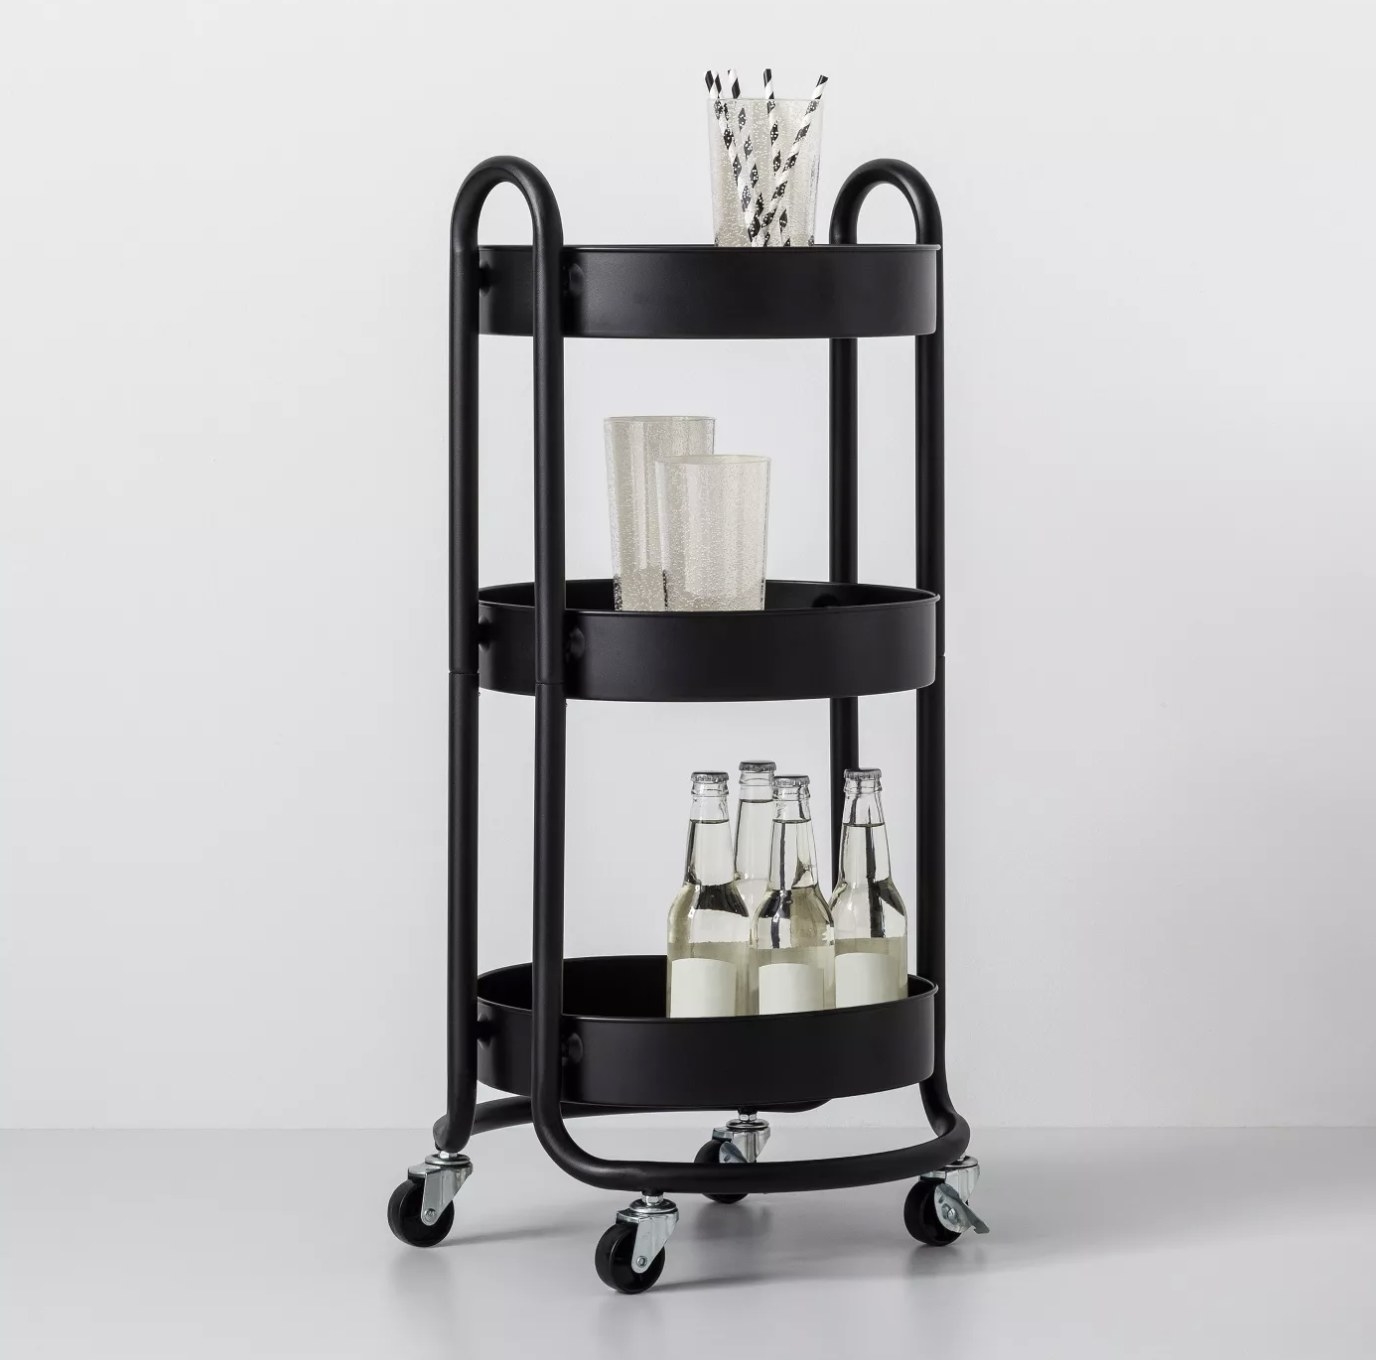 A black cart with casters and three shelves holding glass bottles, cups, and a cup of straws